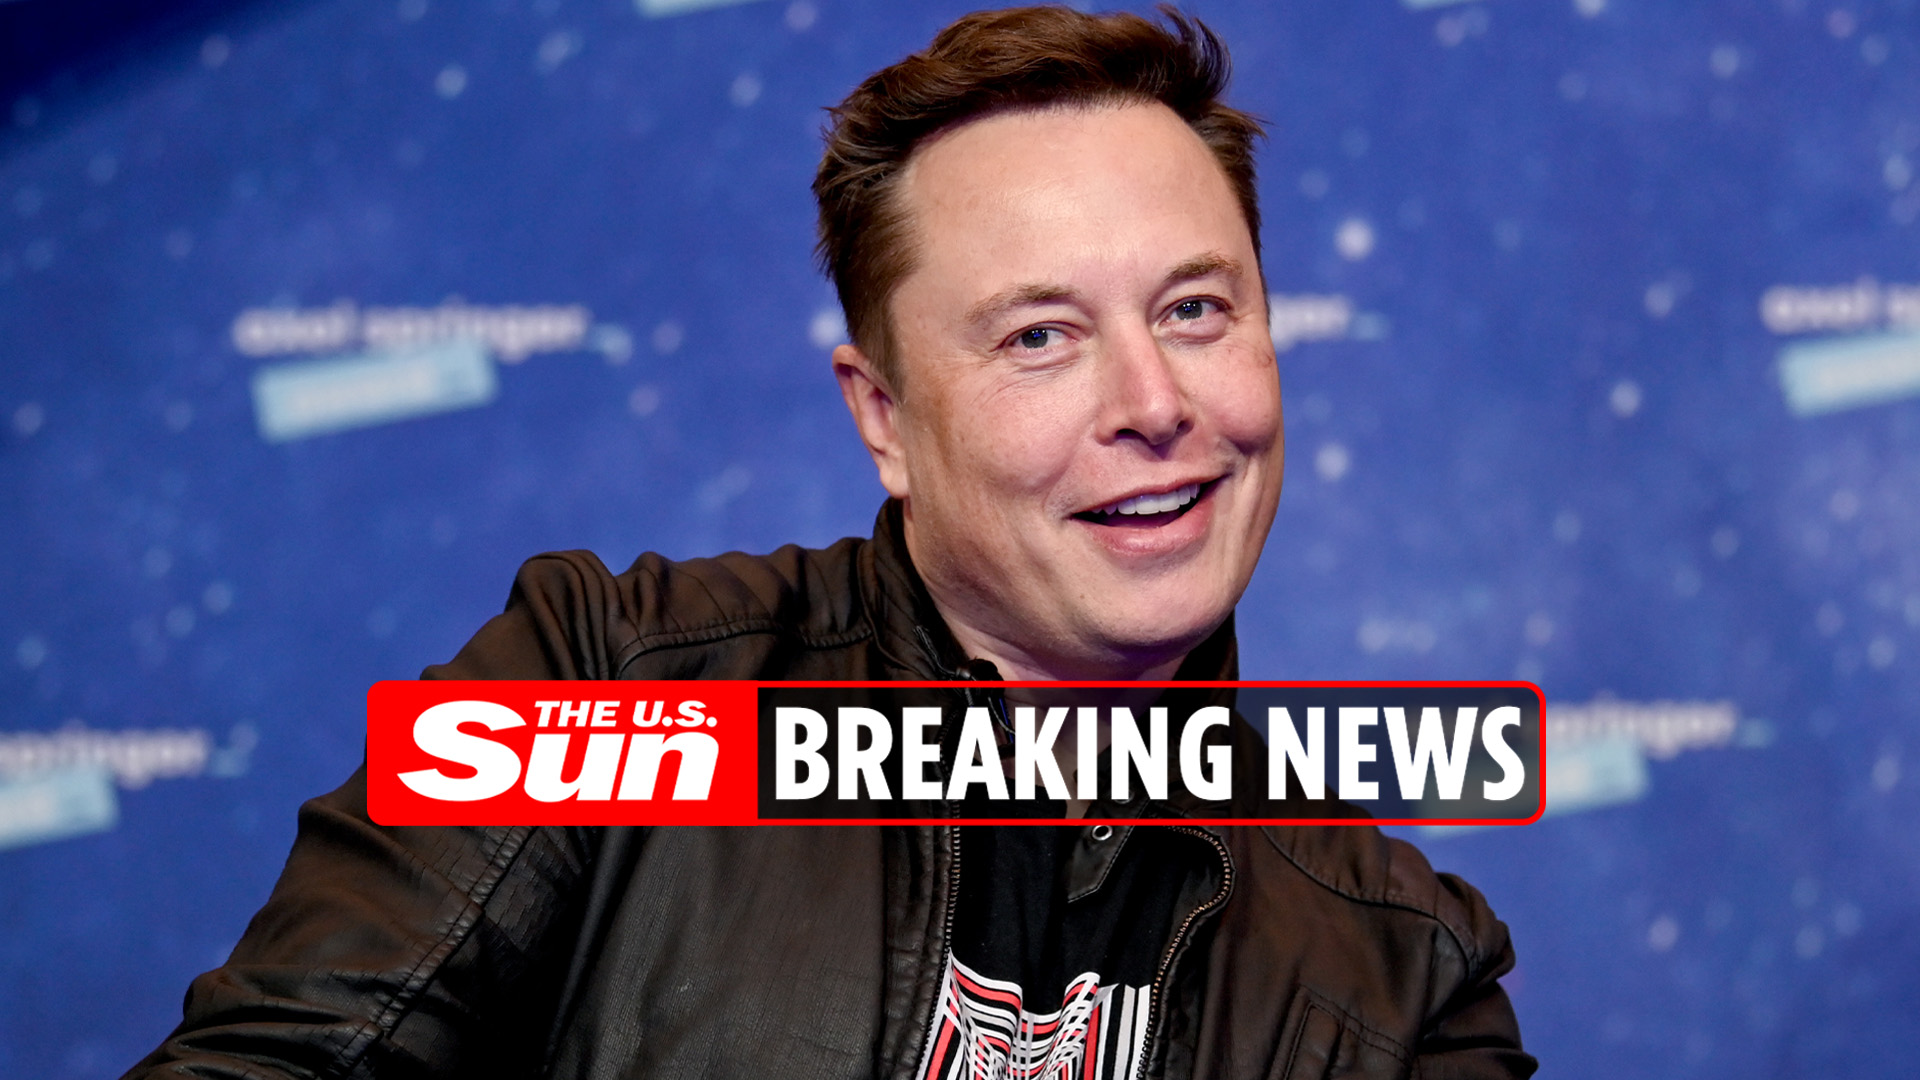 Twitter accepts Elon Musk’s offer making billionaire the ‘new owner’ of the app